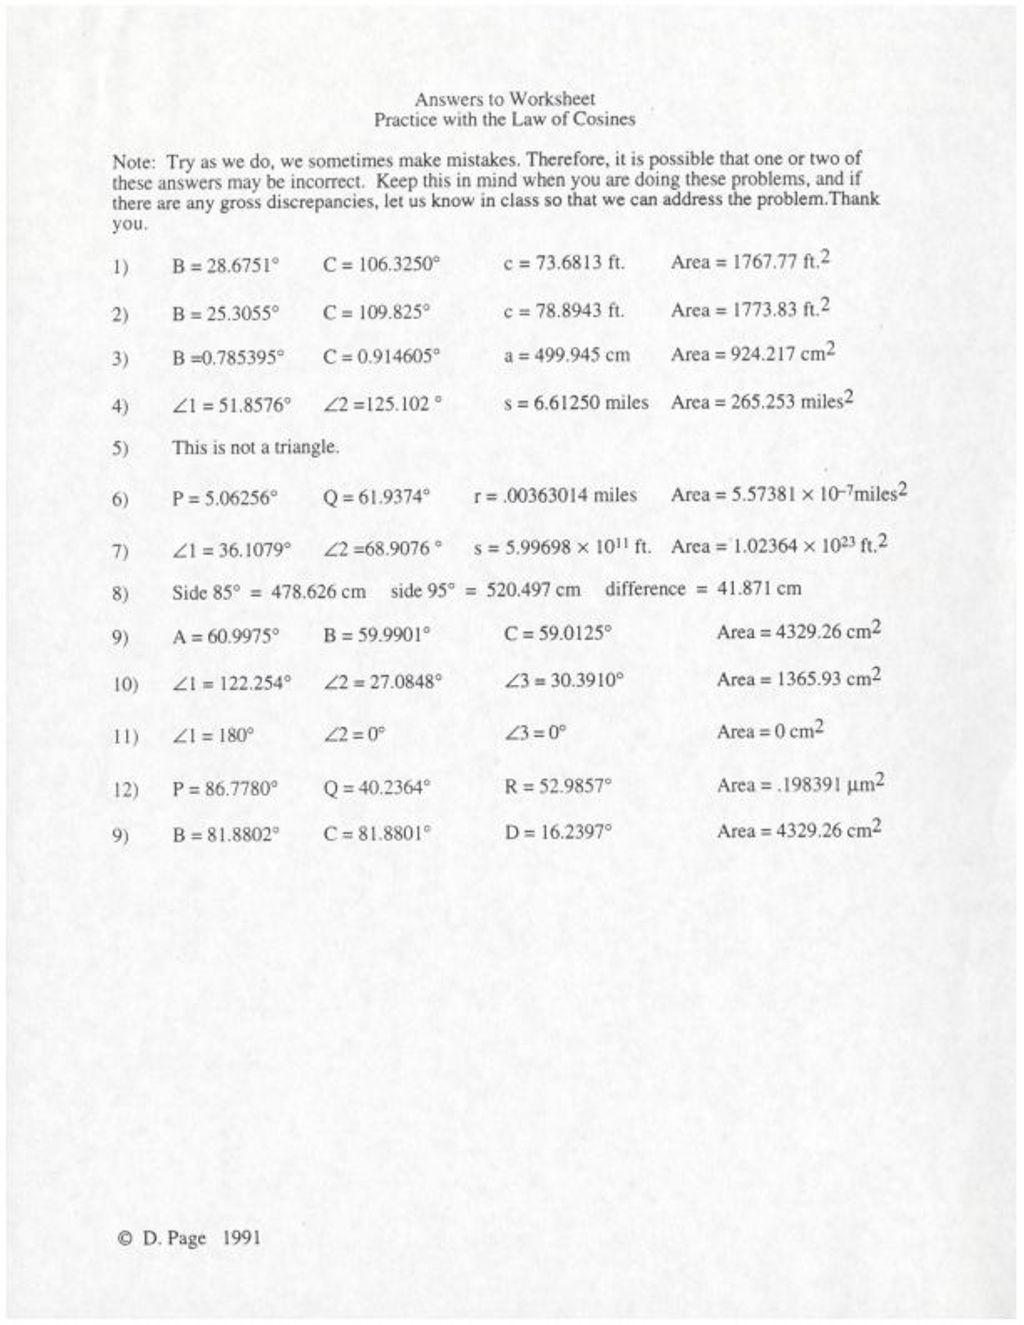 Answers to Worksheet Practice with the Law of Cosines (1991)